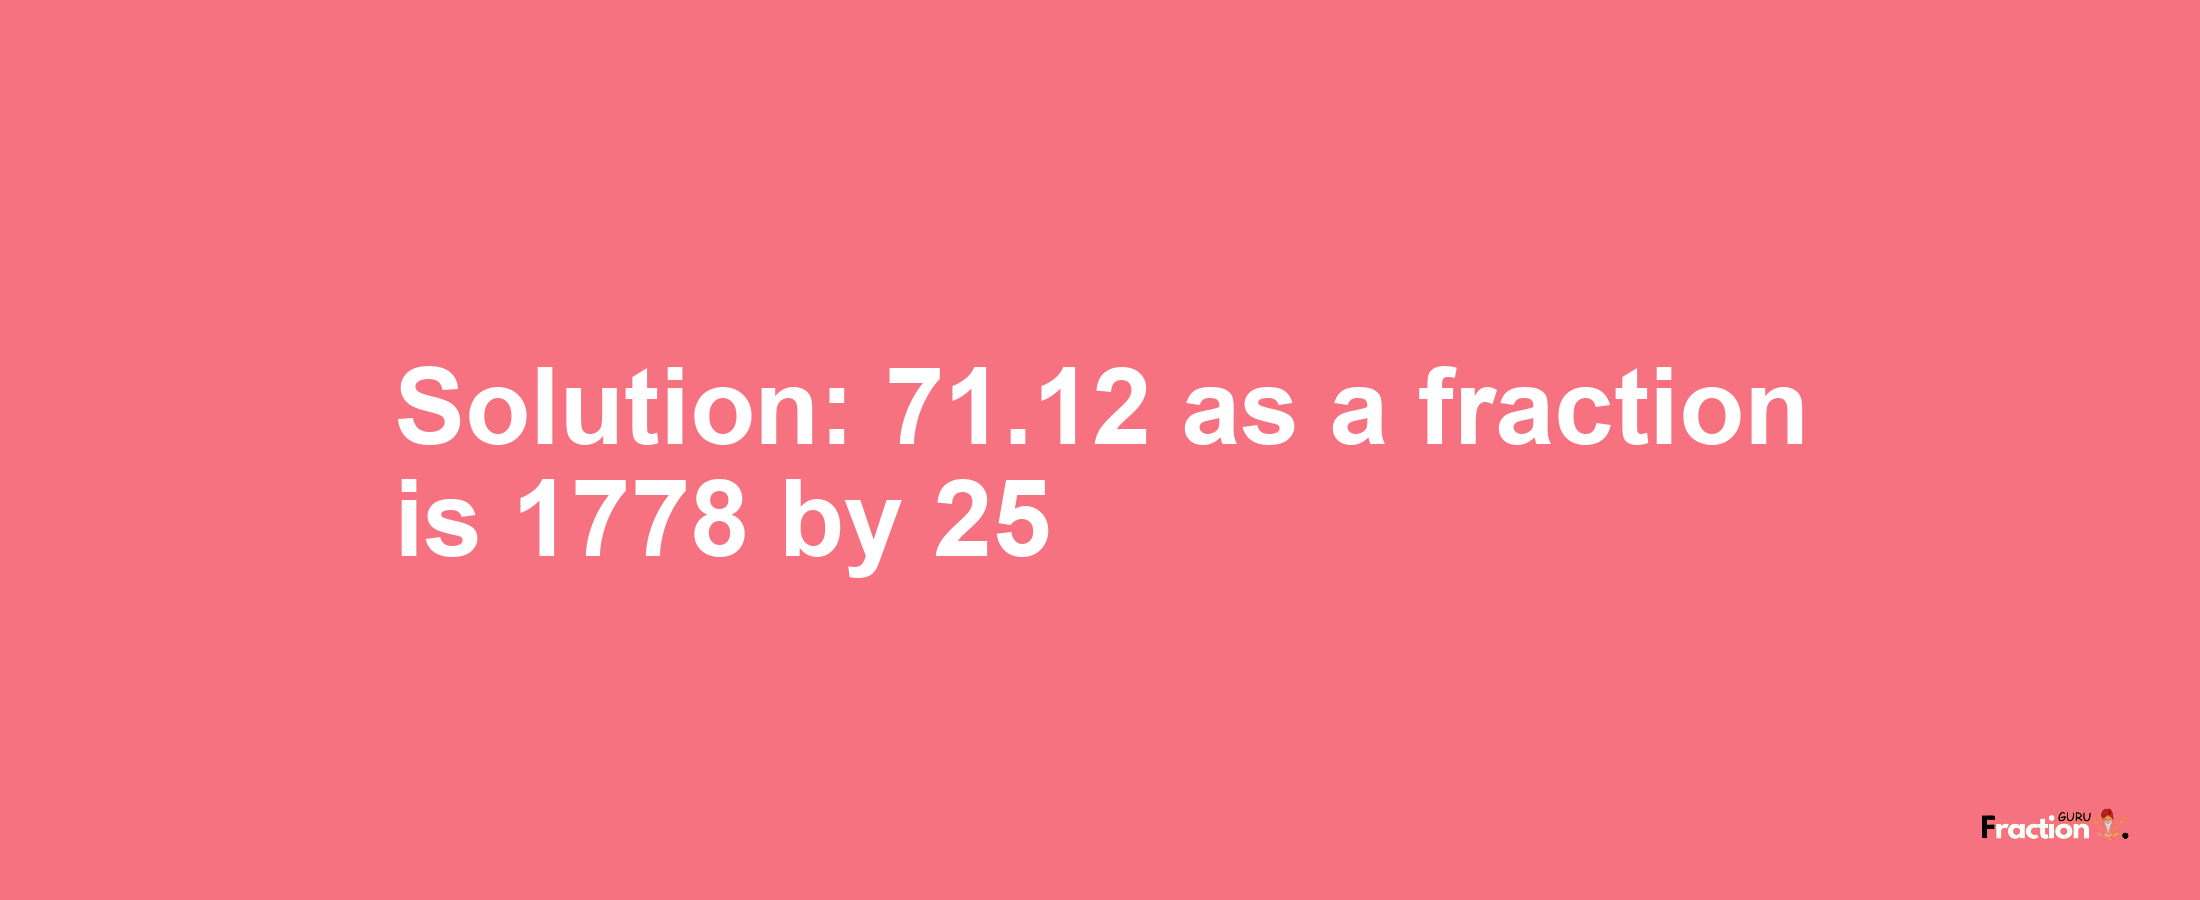 Solution:71.12 as a fraction is 1778/25